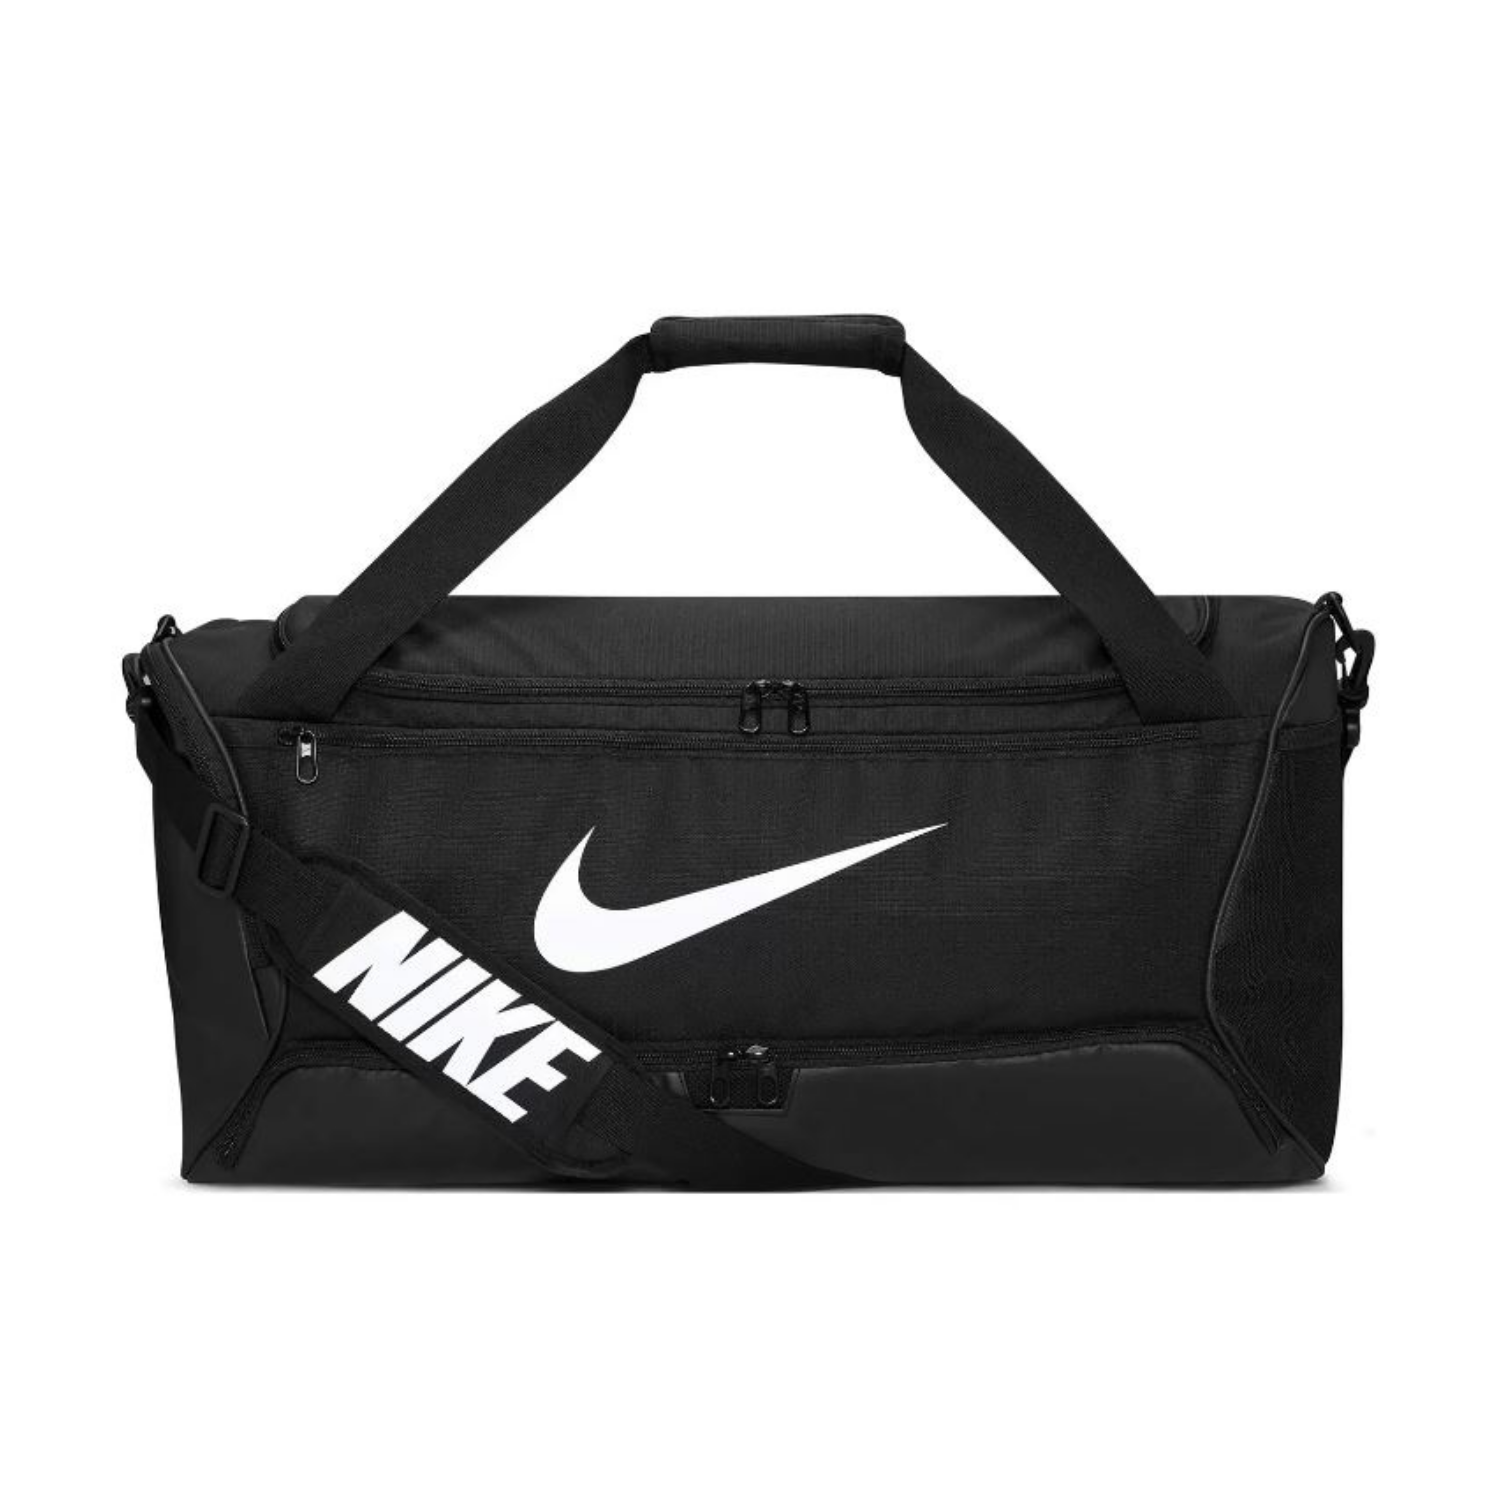 A Nike duffle bag showing that anything can be custom branded with your logo or graphics on them.